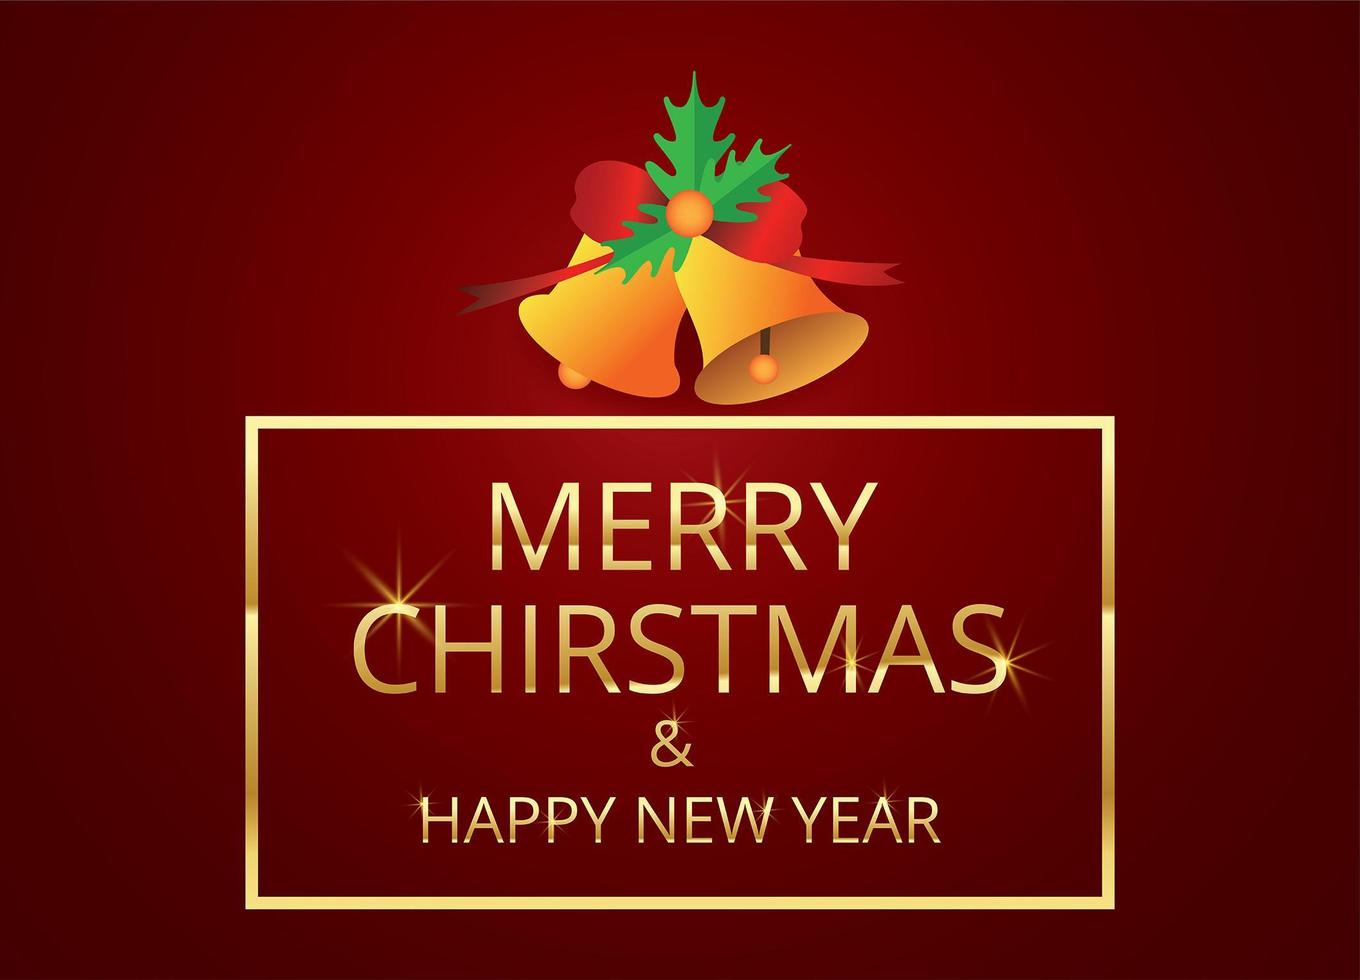 Merry Christmas and happy new year on red vector